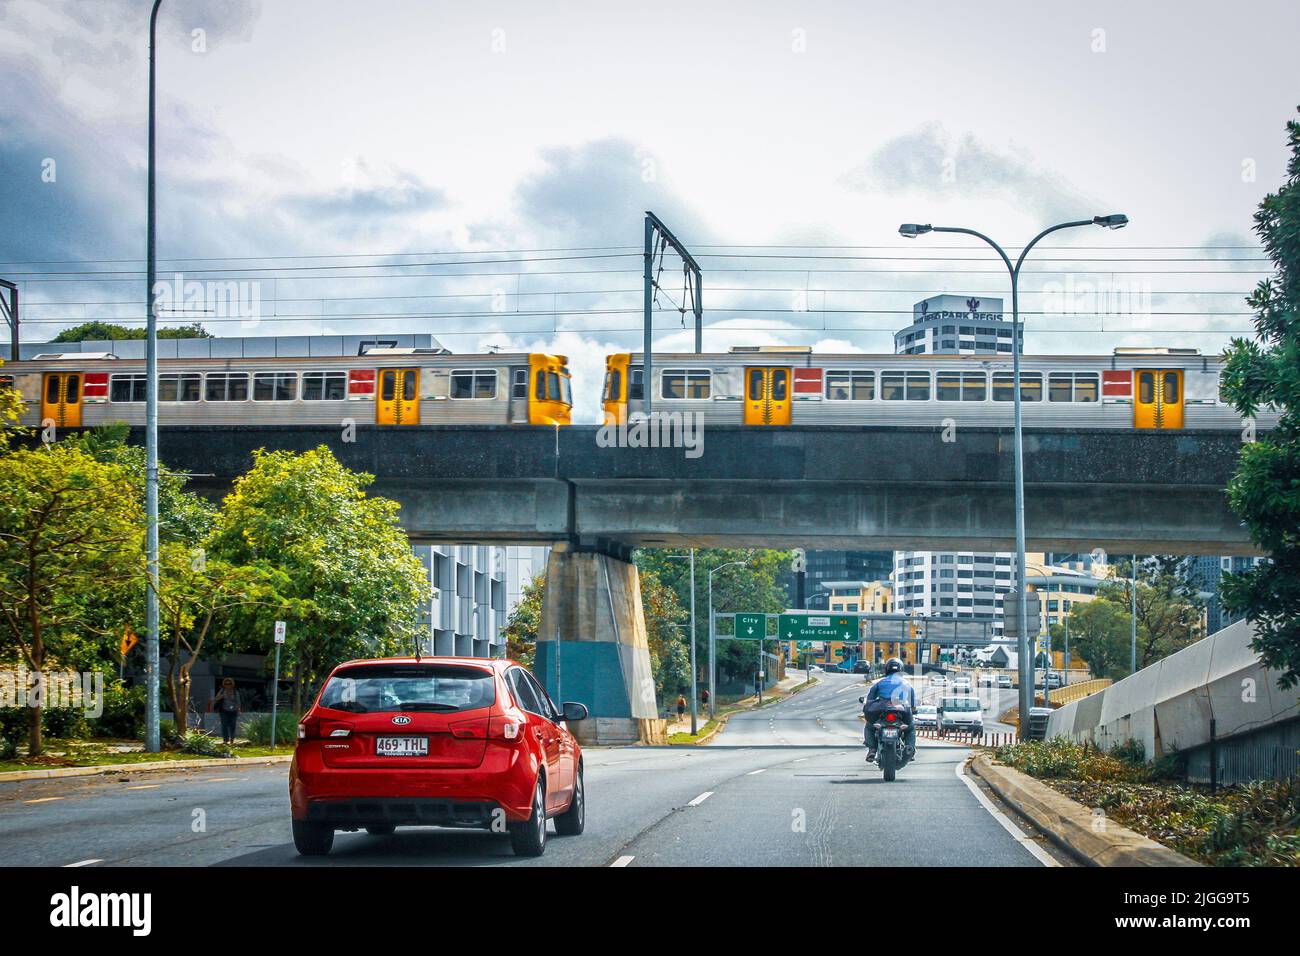 2014 12 04 Brisbane Australia - Red car and motorcycle drive under overpass with train distant sign for exit to Gold Coast and City Stock Photo